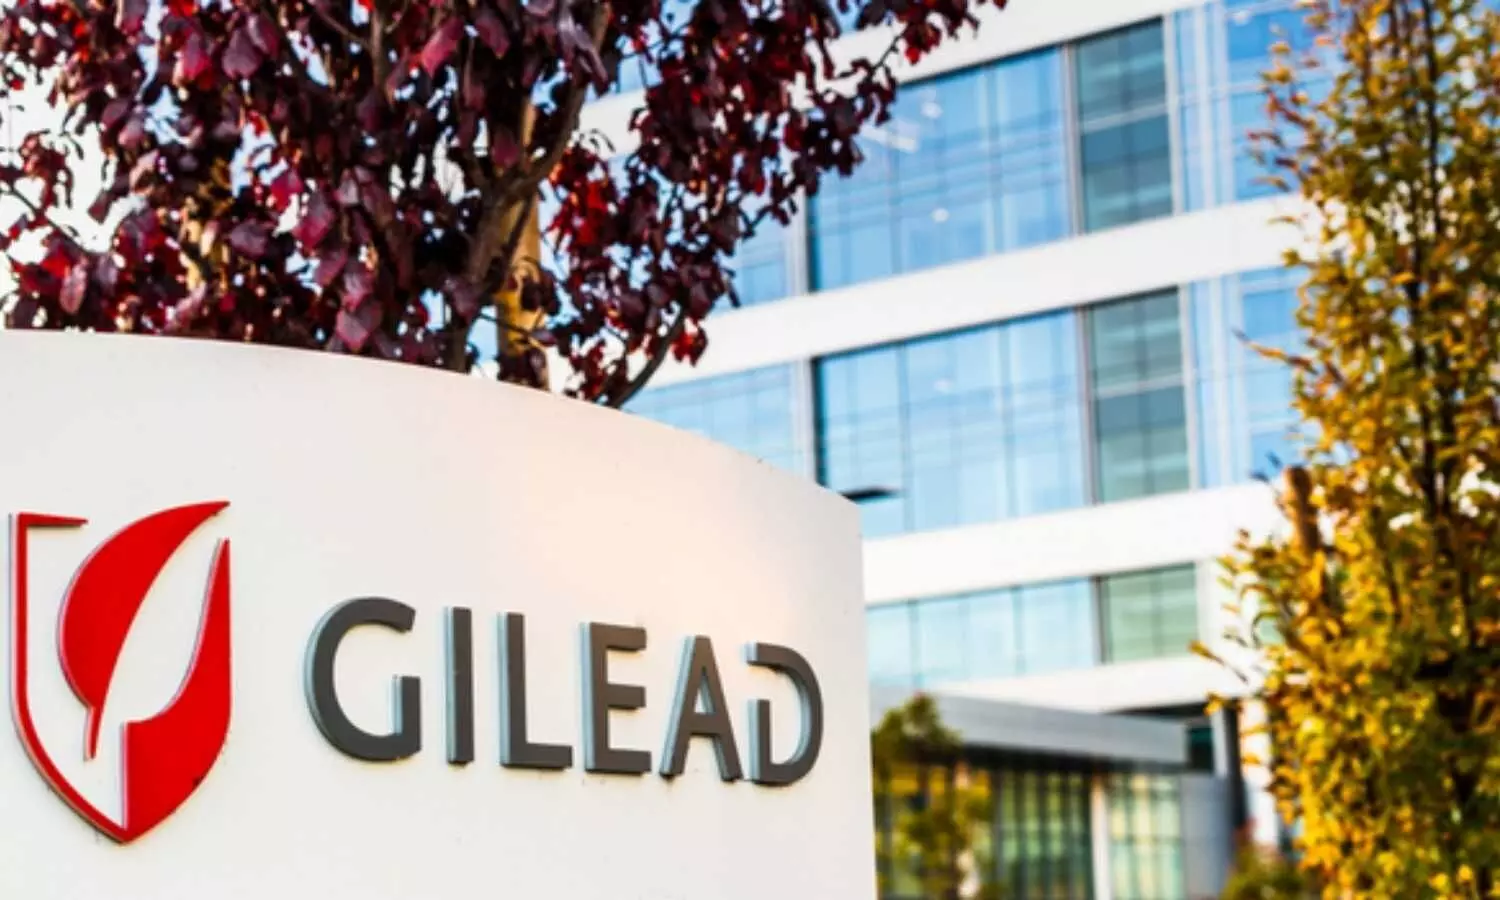 Gilead Sciences Trodelvy under USFDA priority review for adult patients with pretreated metastatic breast cancer